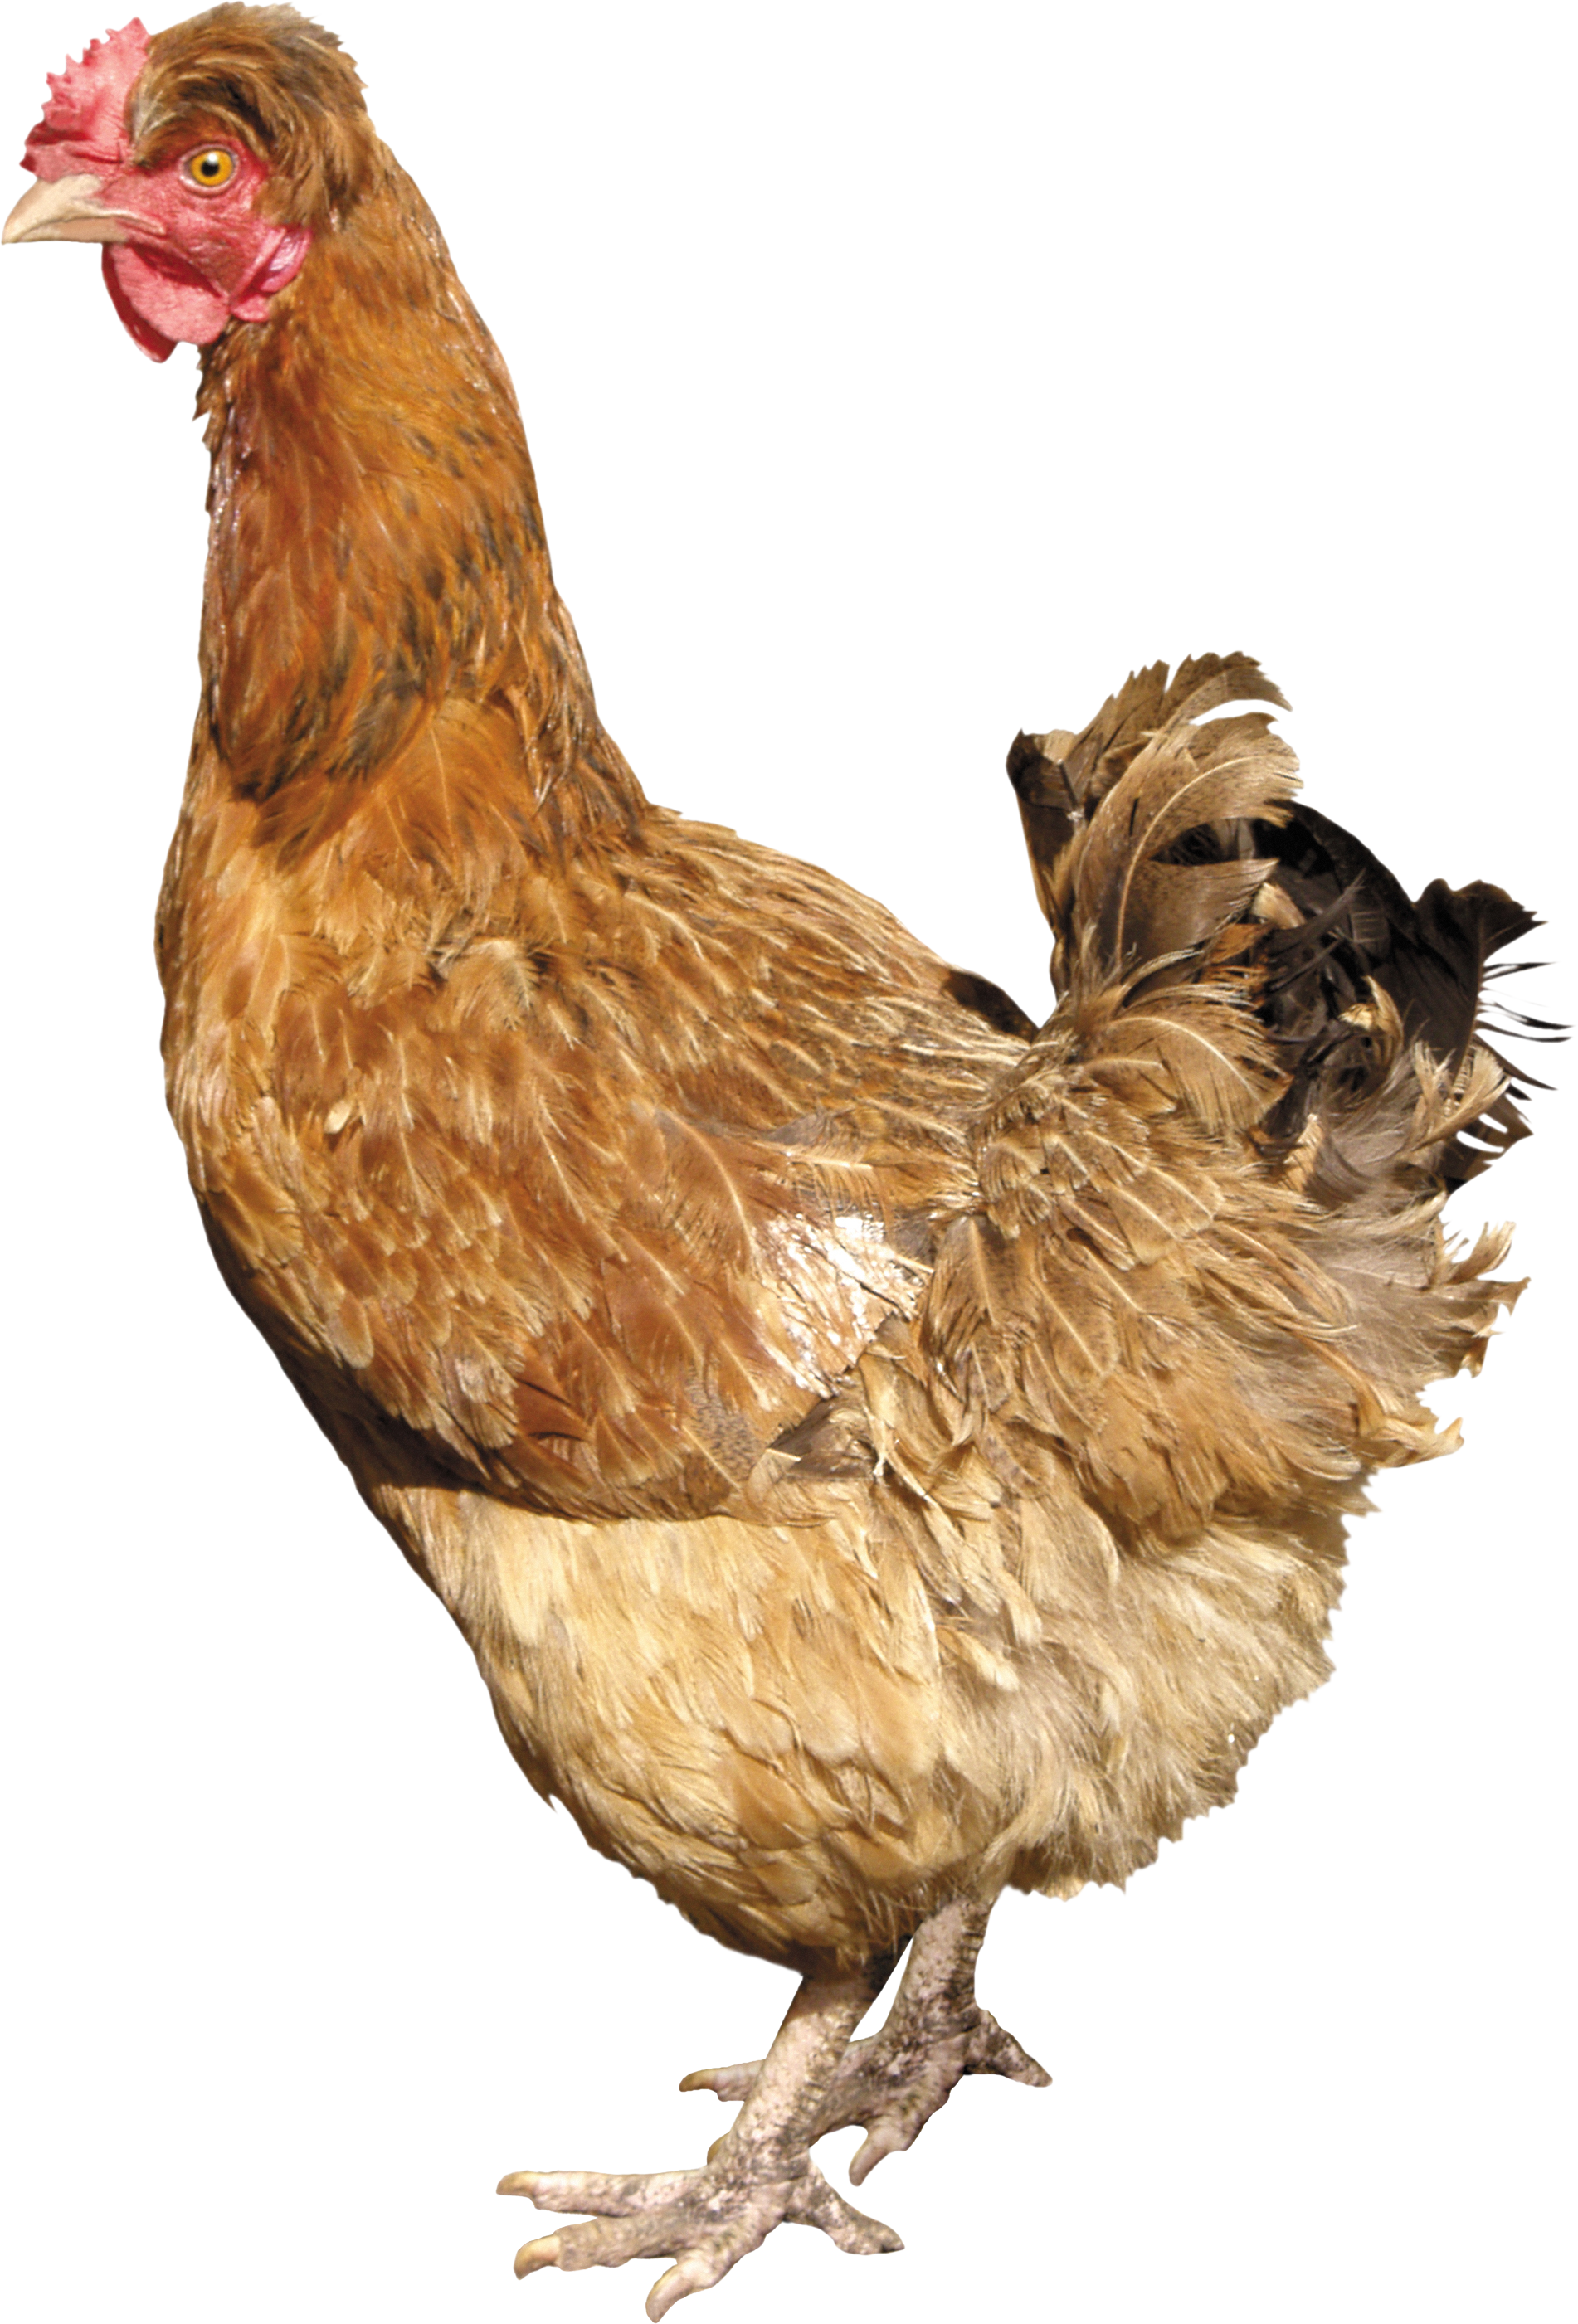 Chicken Png Image - Chicken, Transparent background PNG HD thumbnail